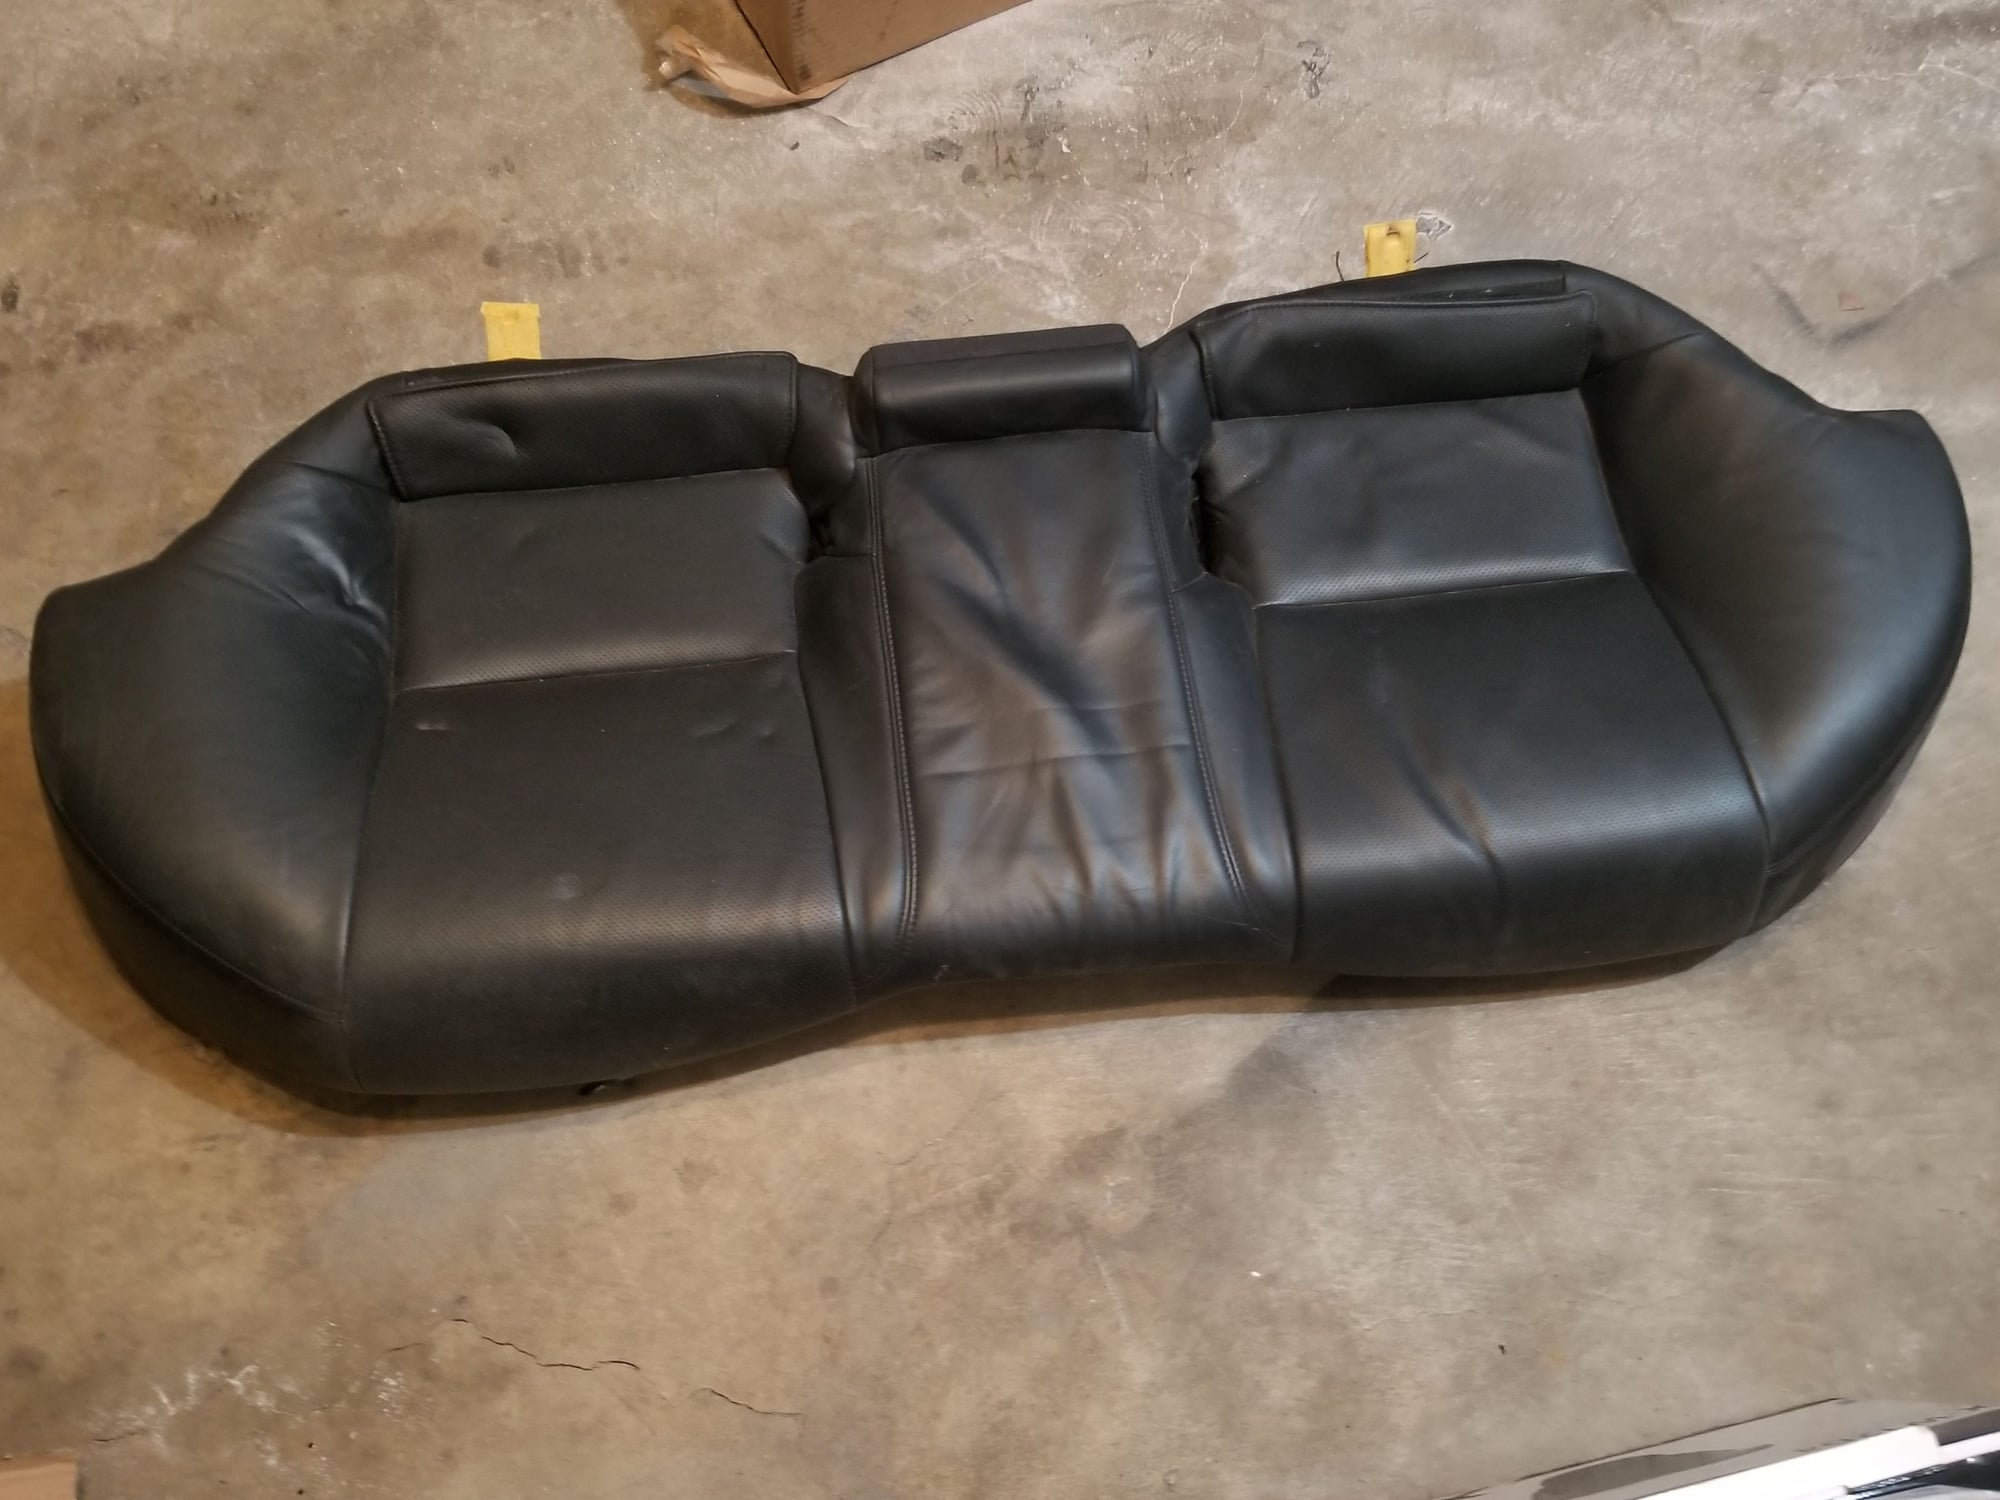 Interior/Upholstery - 2006-2013 IS250 IS350 oem black leather - Used - 2006 to 2013 Lexus IS250 - Dublin, OH 43017, United States